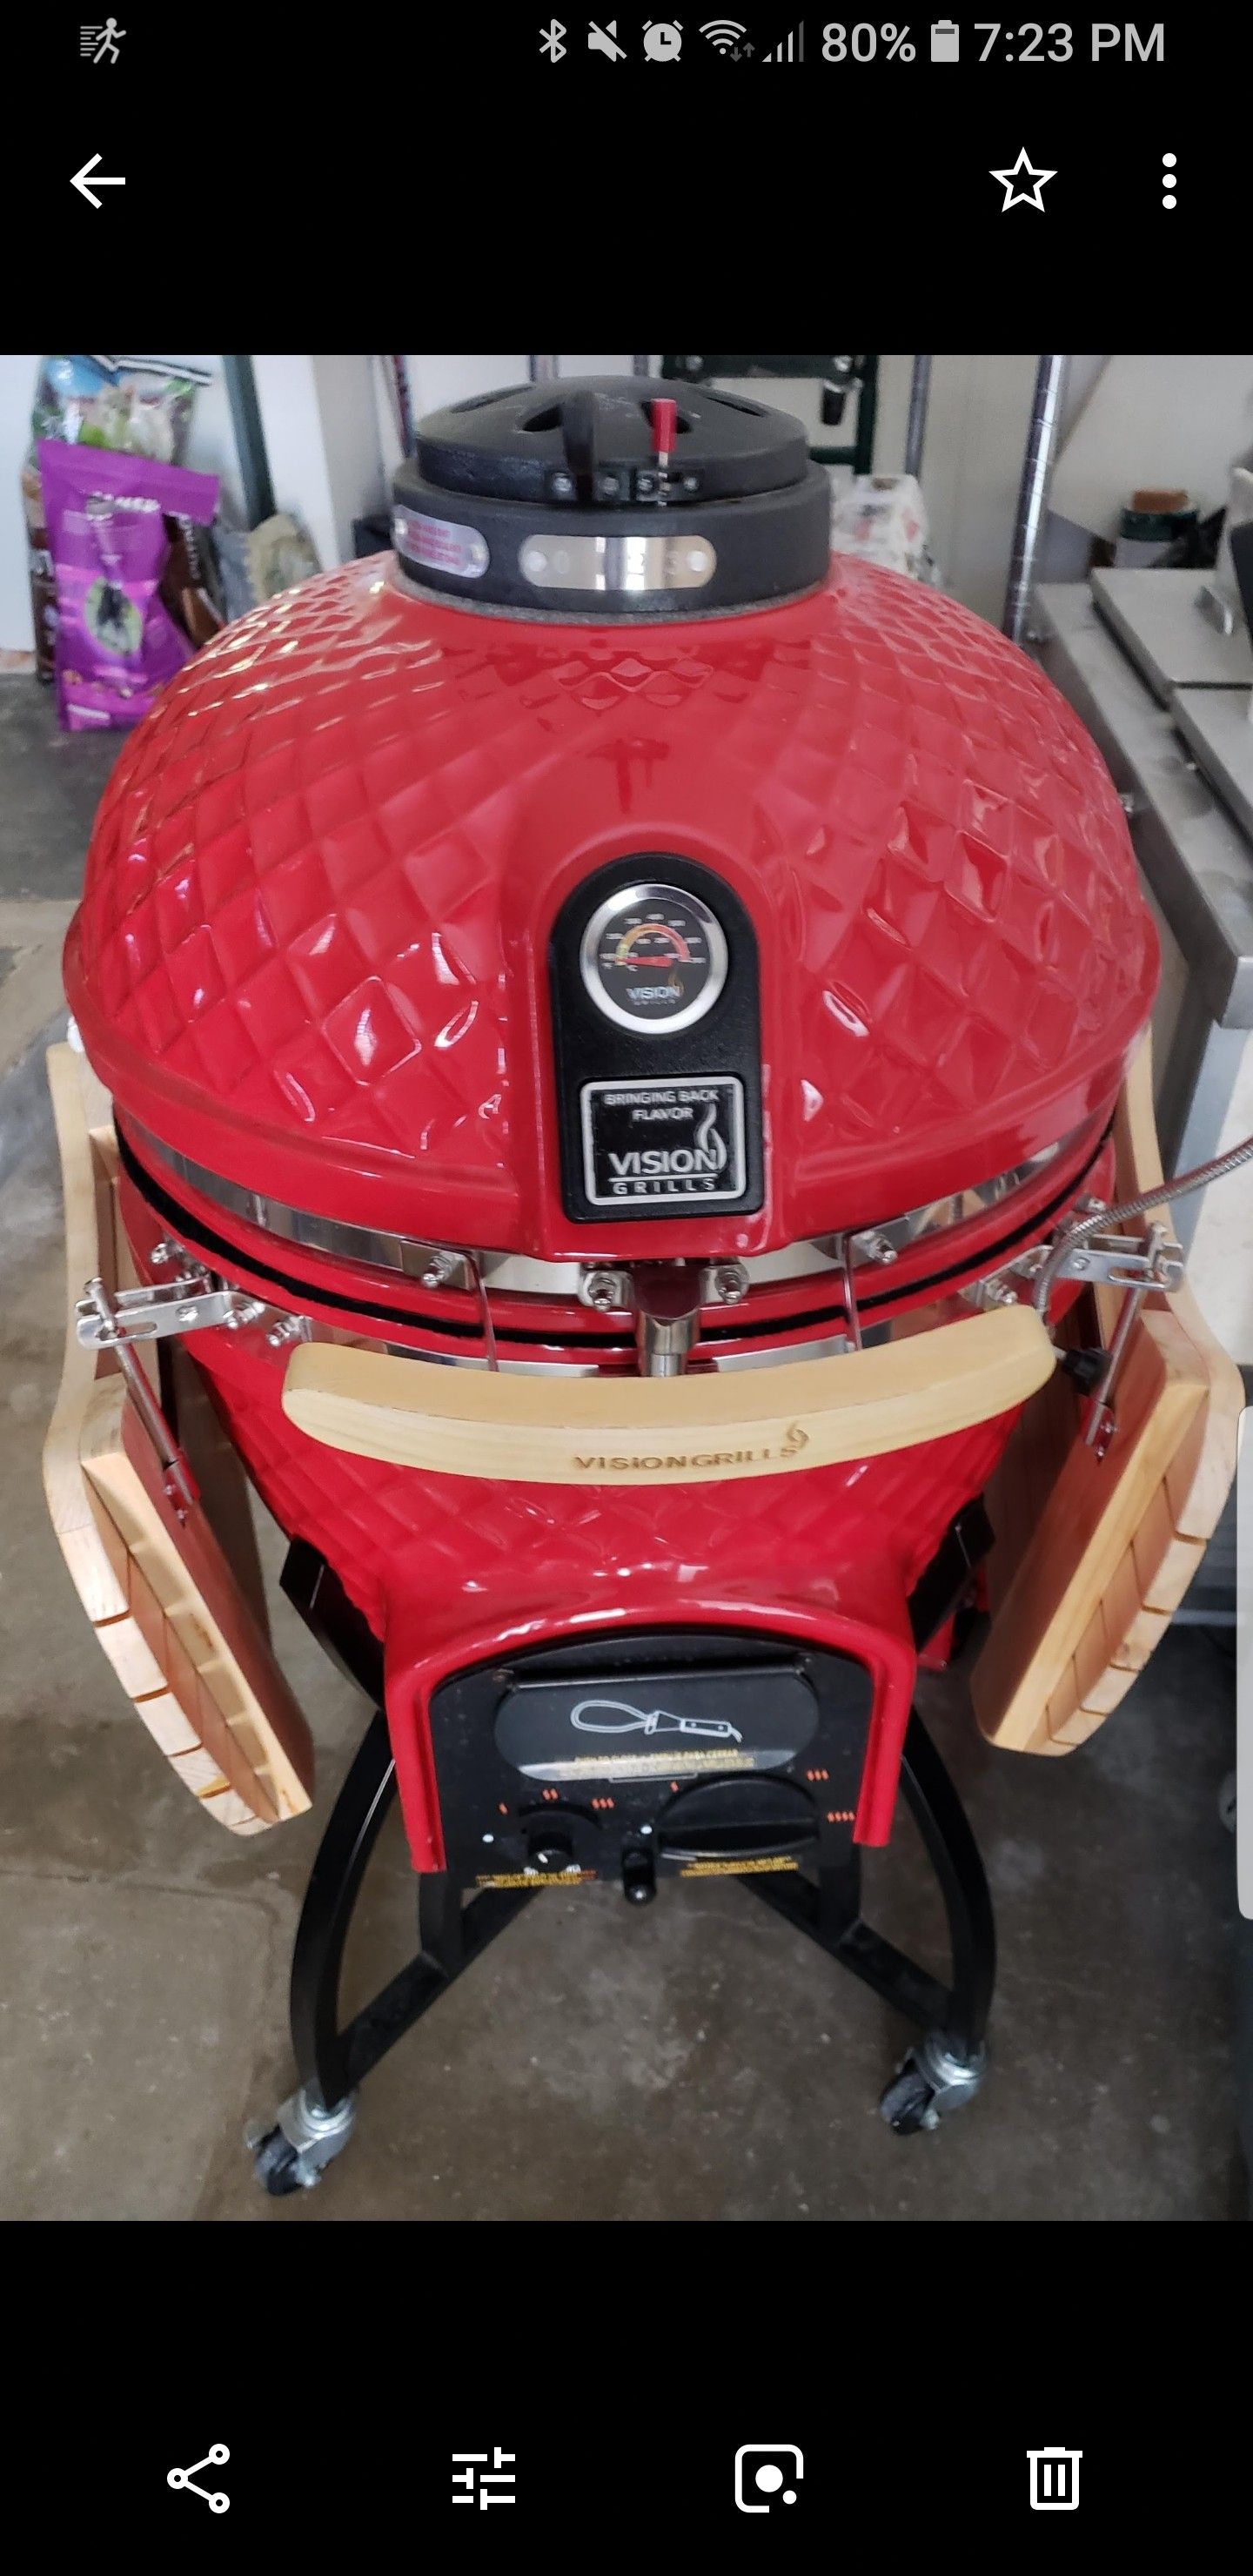 Selling or trading my Vision Pro C ceramic bbq grill